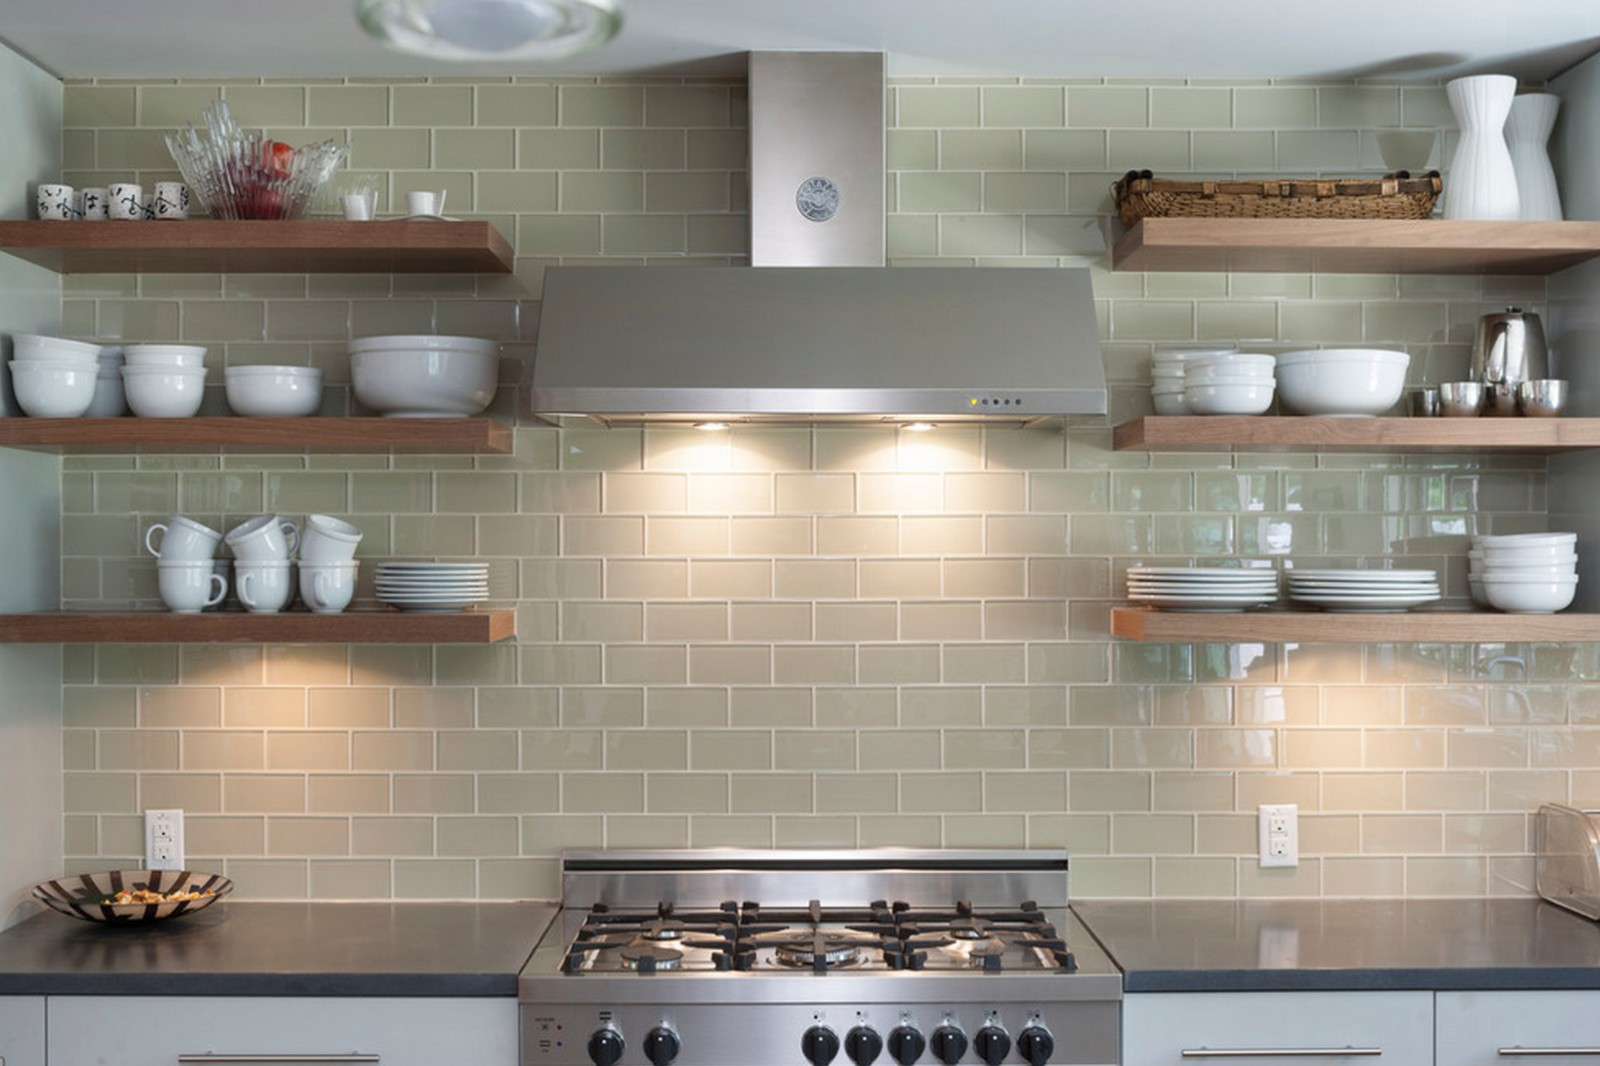 Open shelving in the kitchen with a stove.